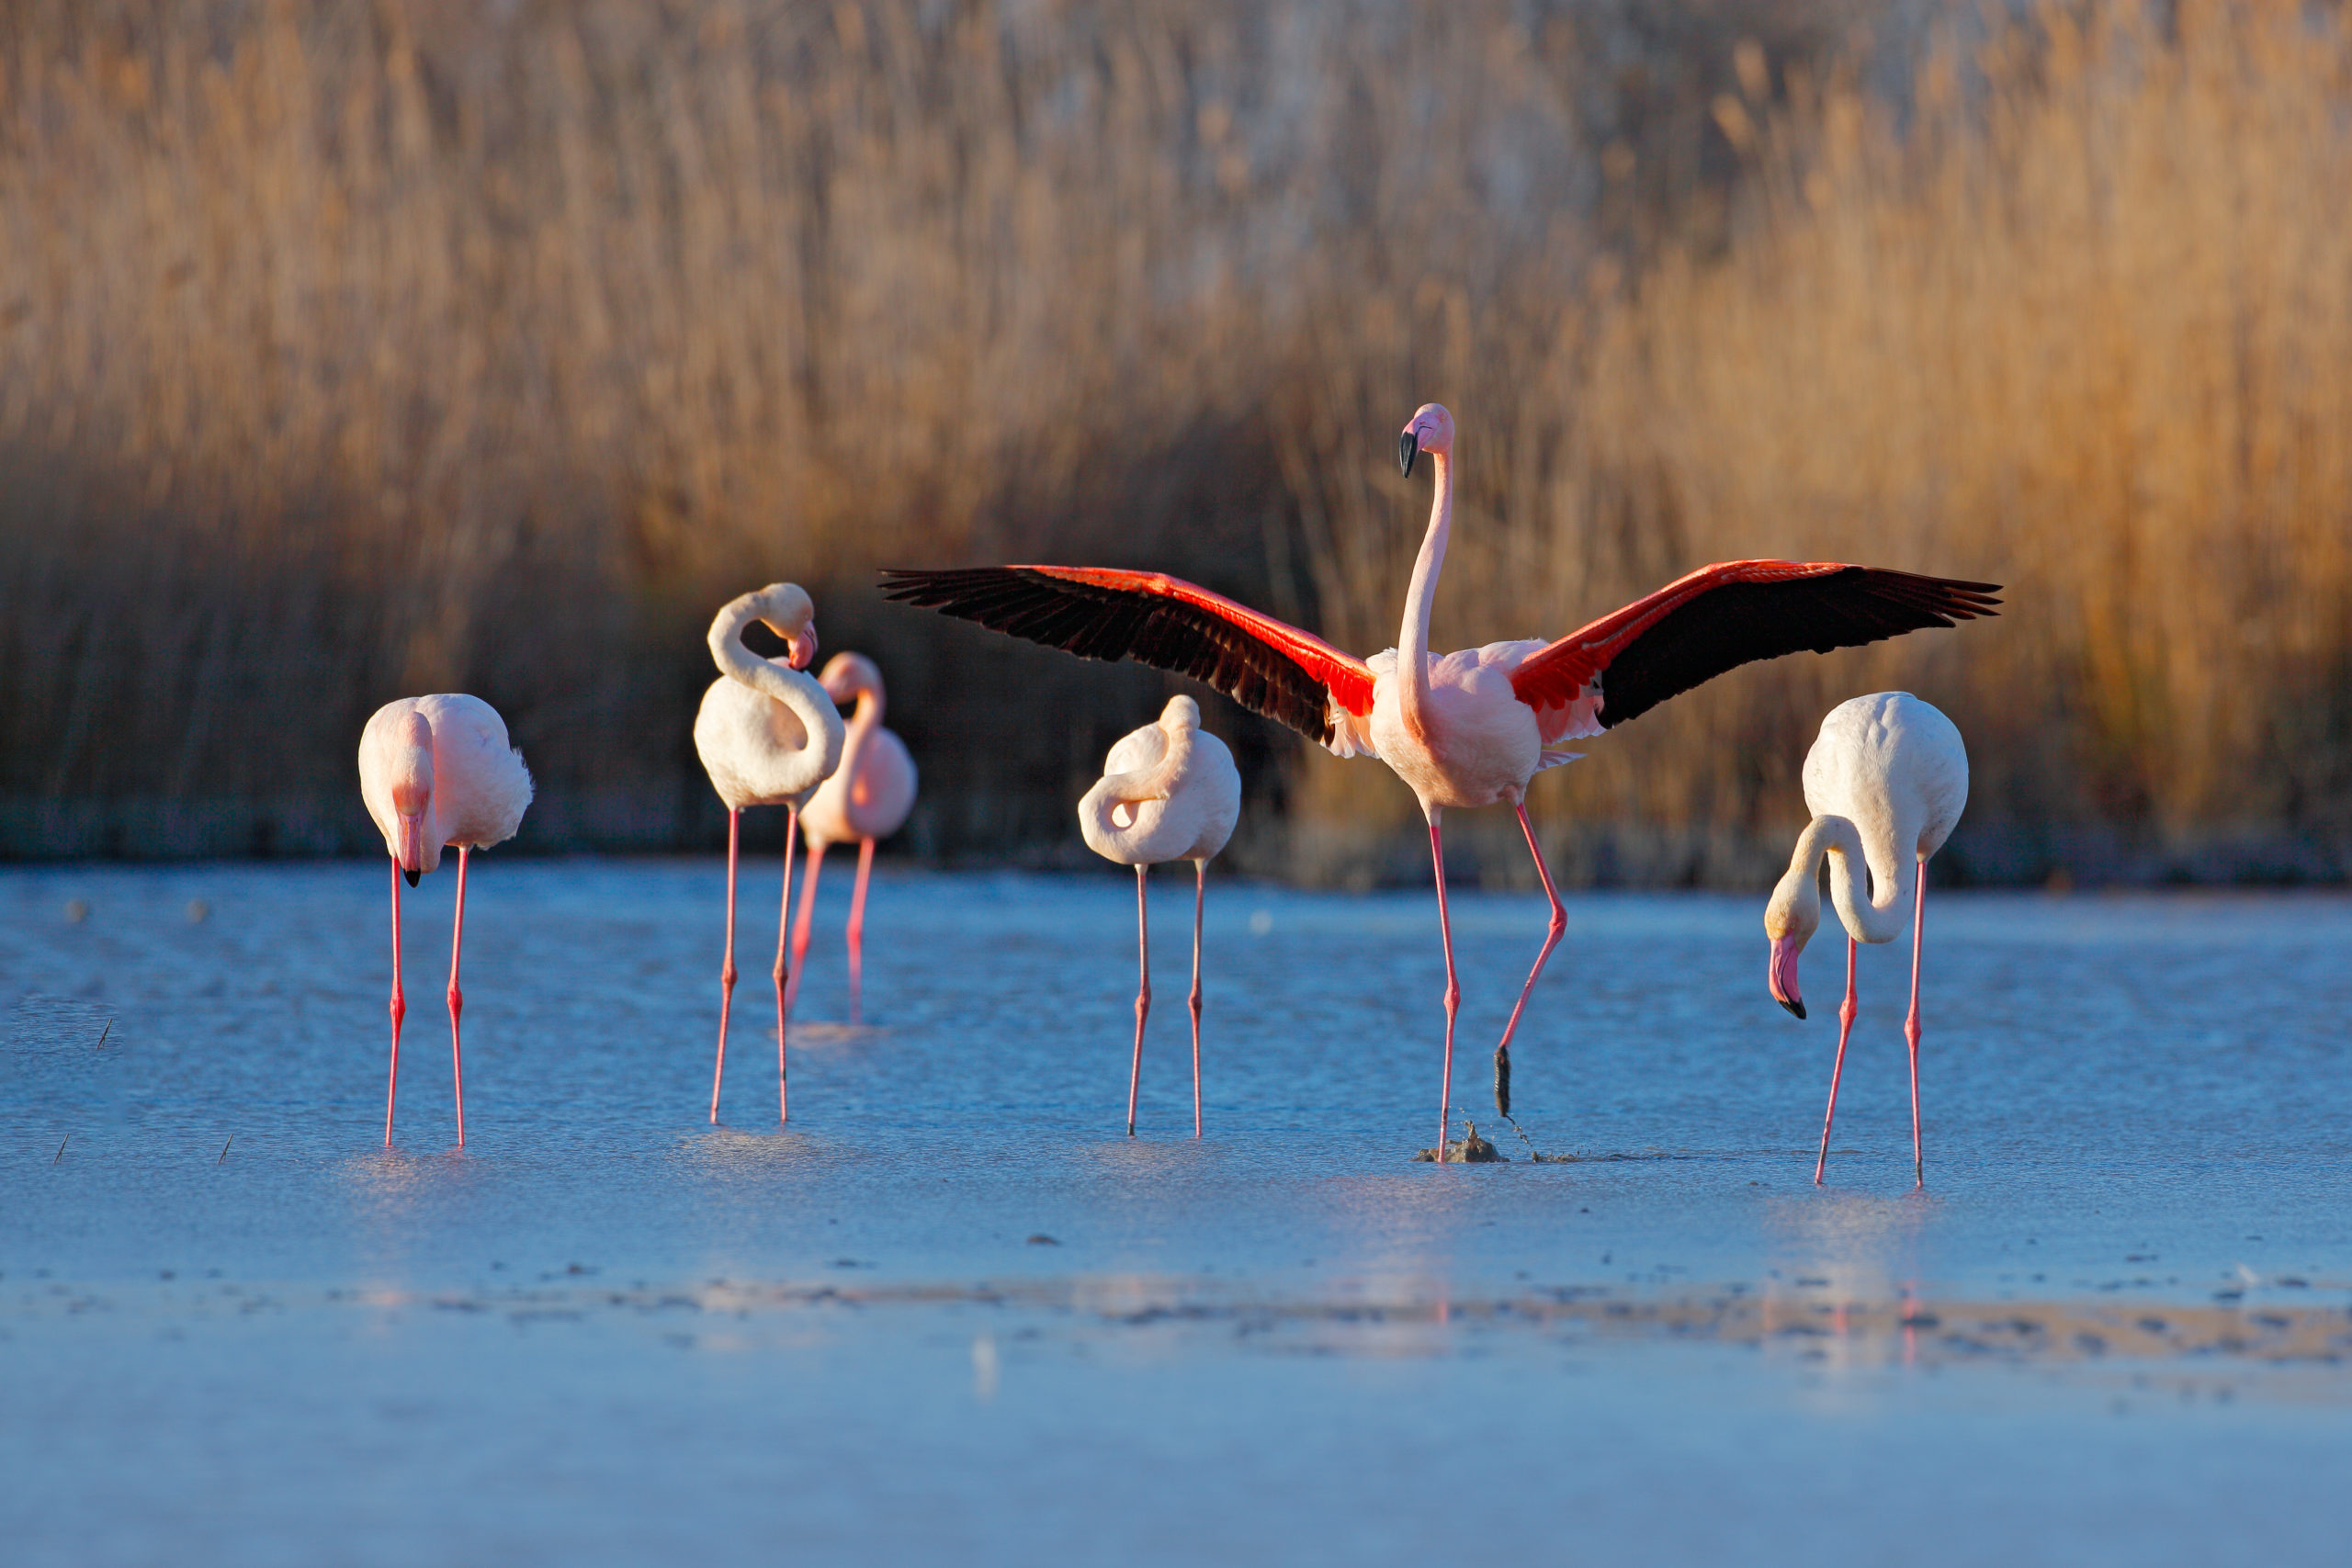 Watching Flamingos is one of the best things to do in Greece